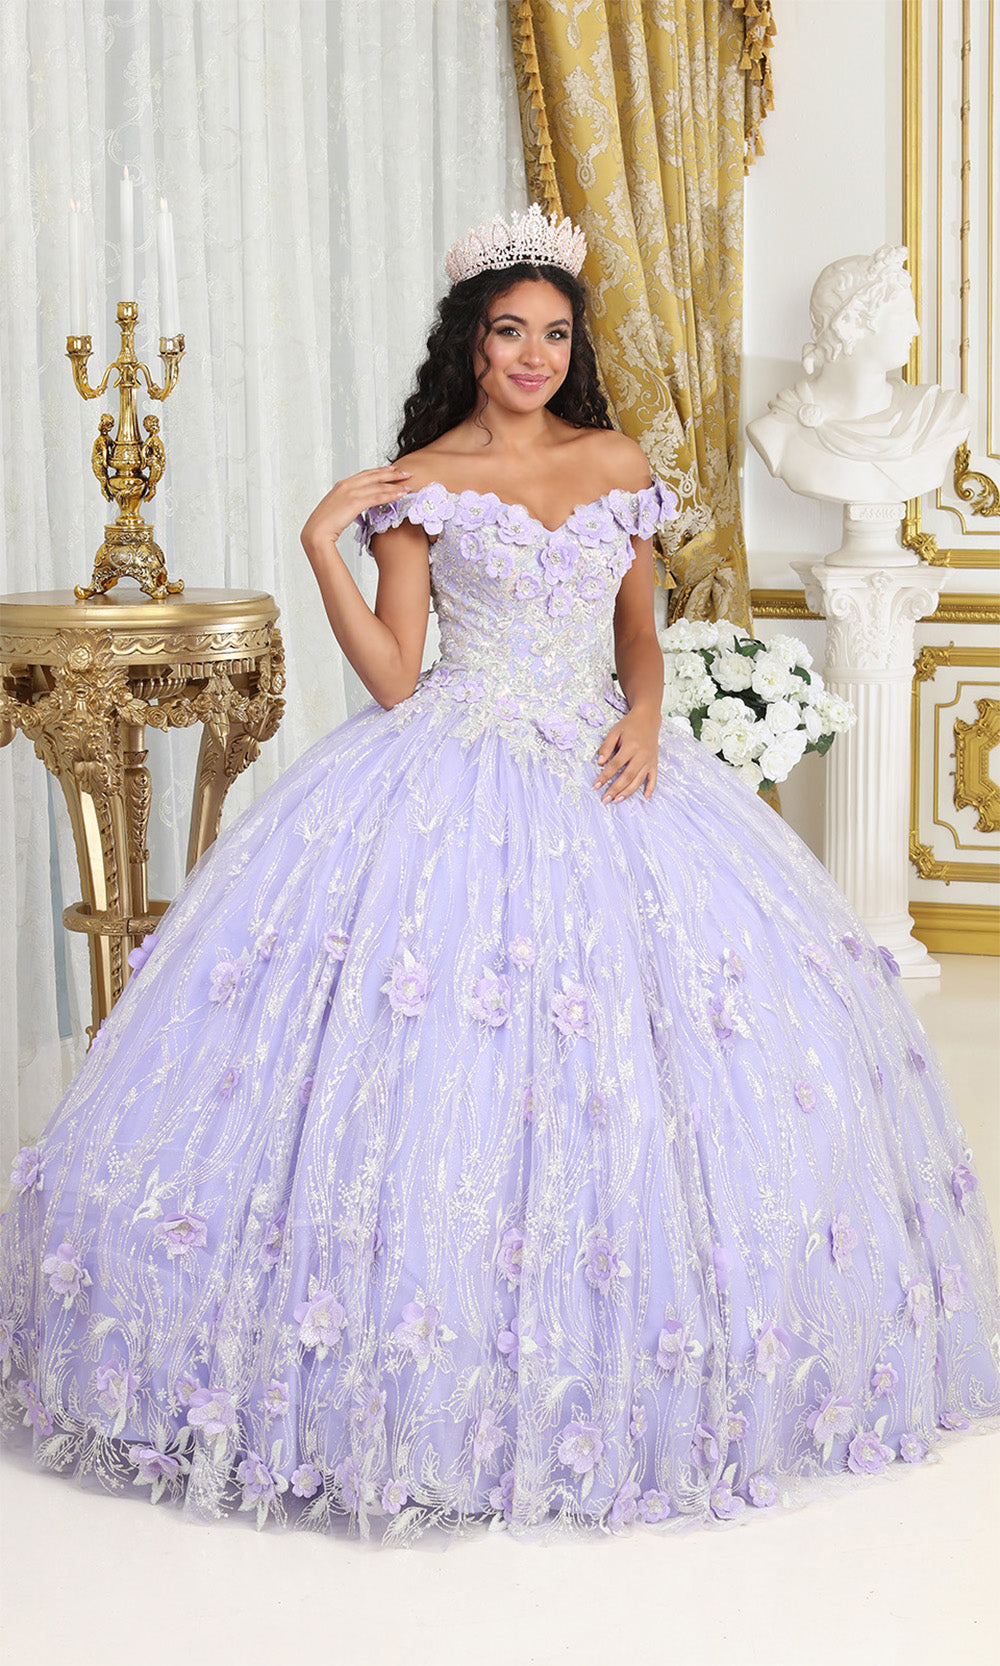 May Queen LK225 Lilac